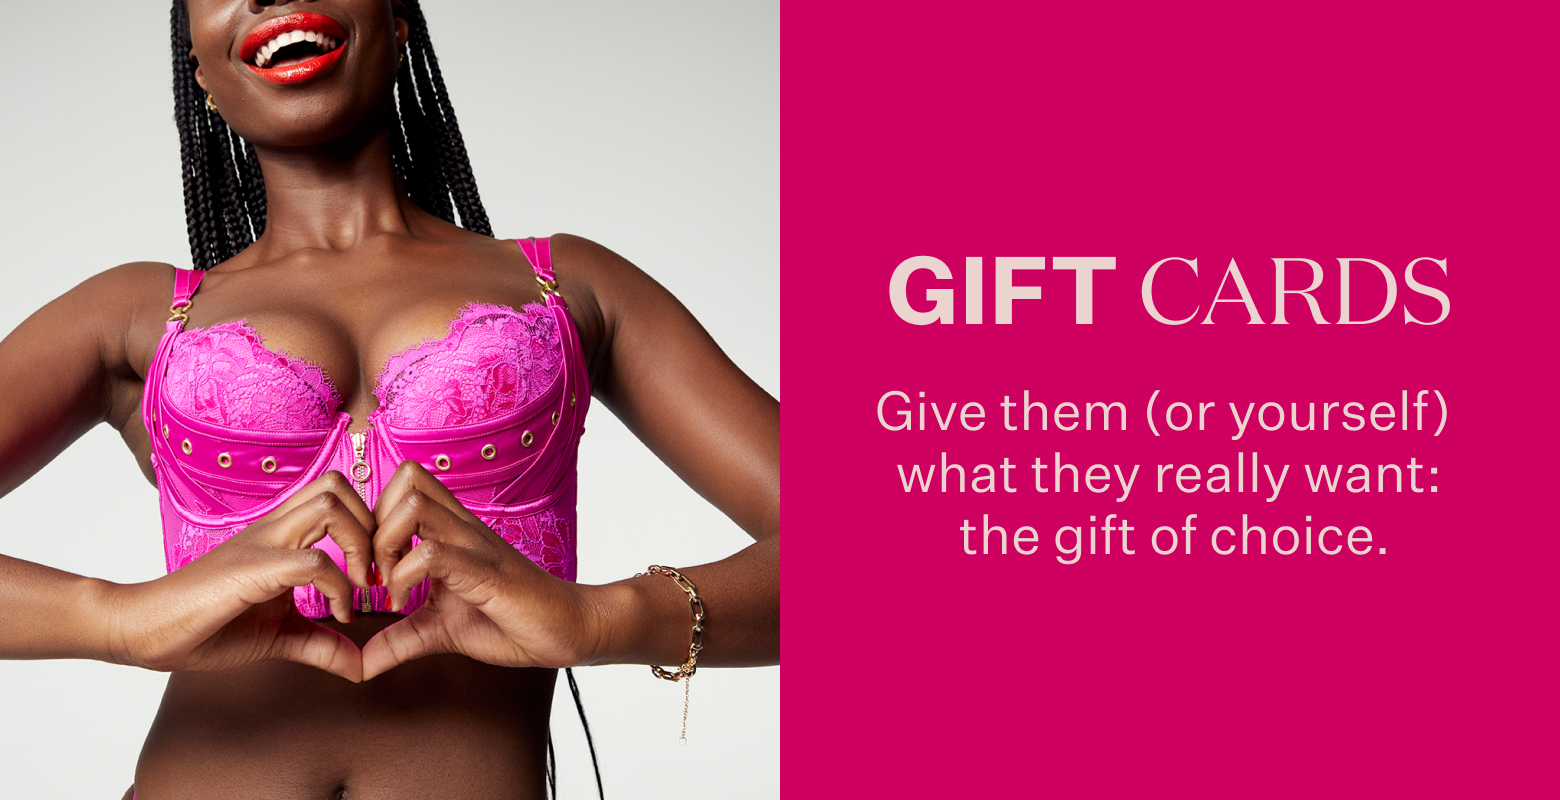 Gift Cards. Give them what they really want: the choice.